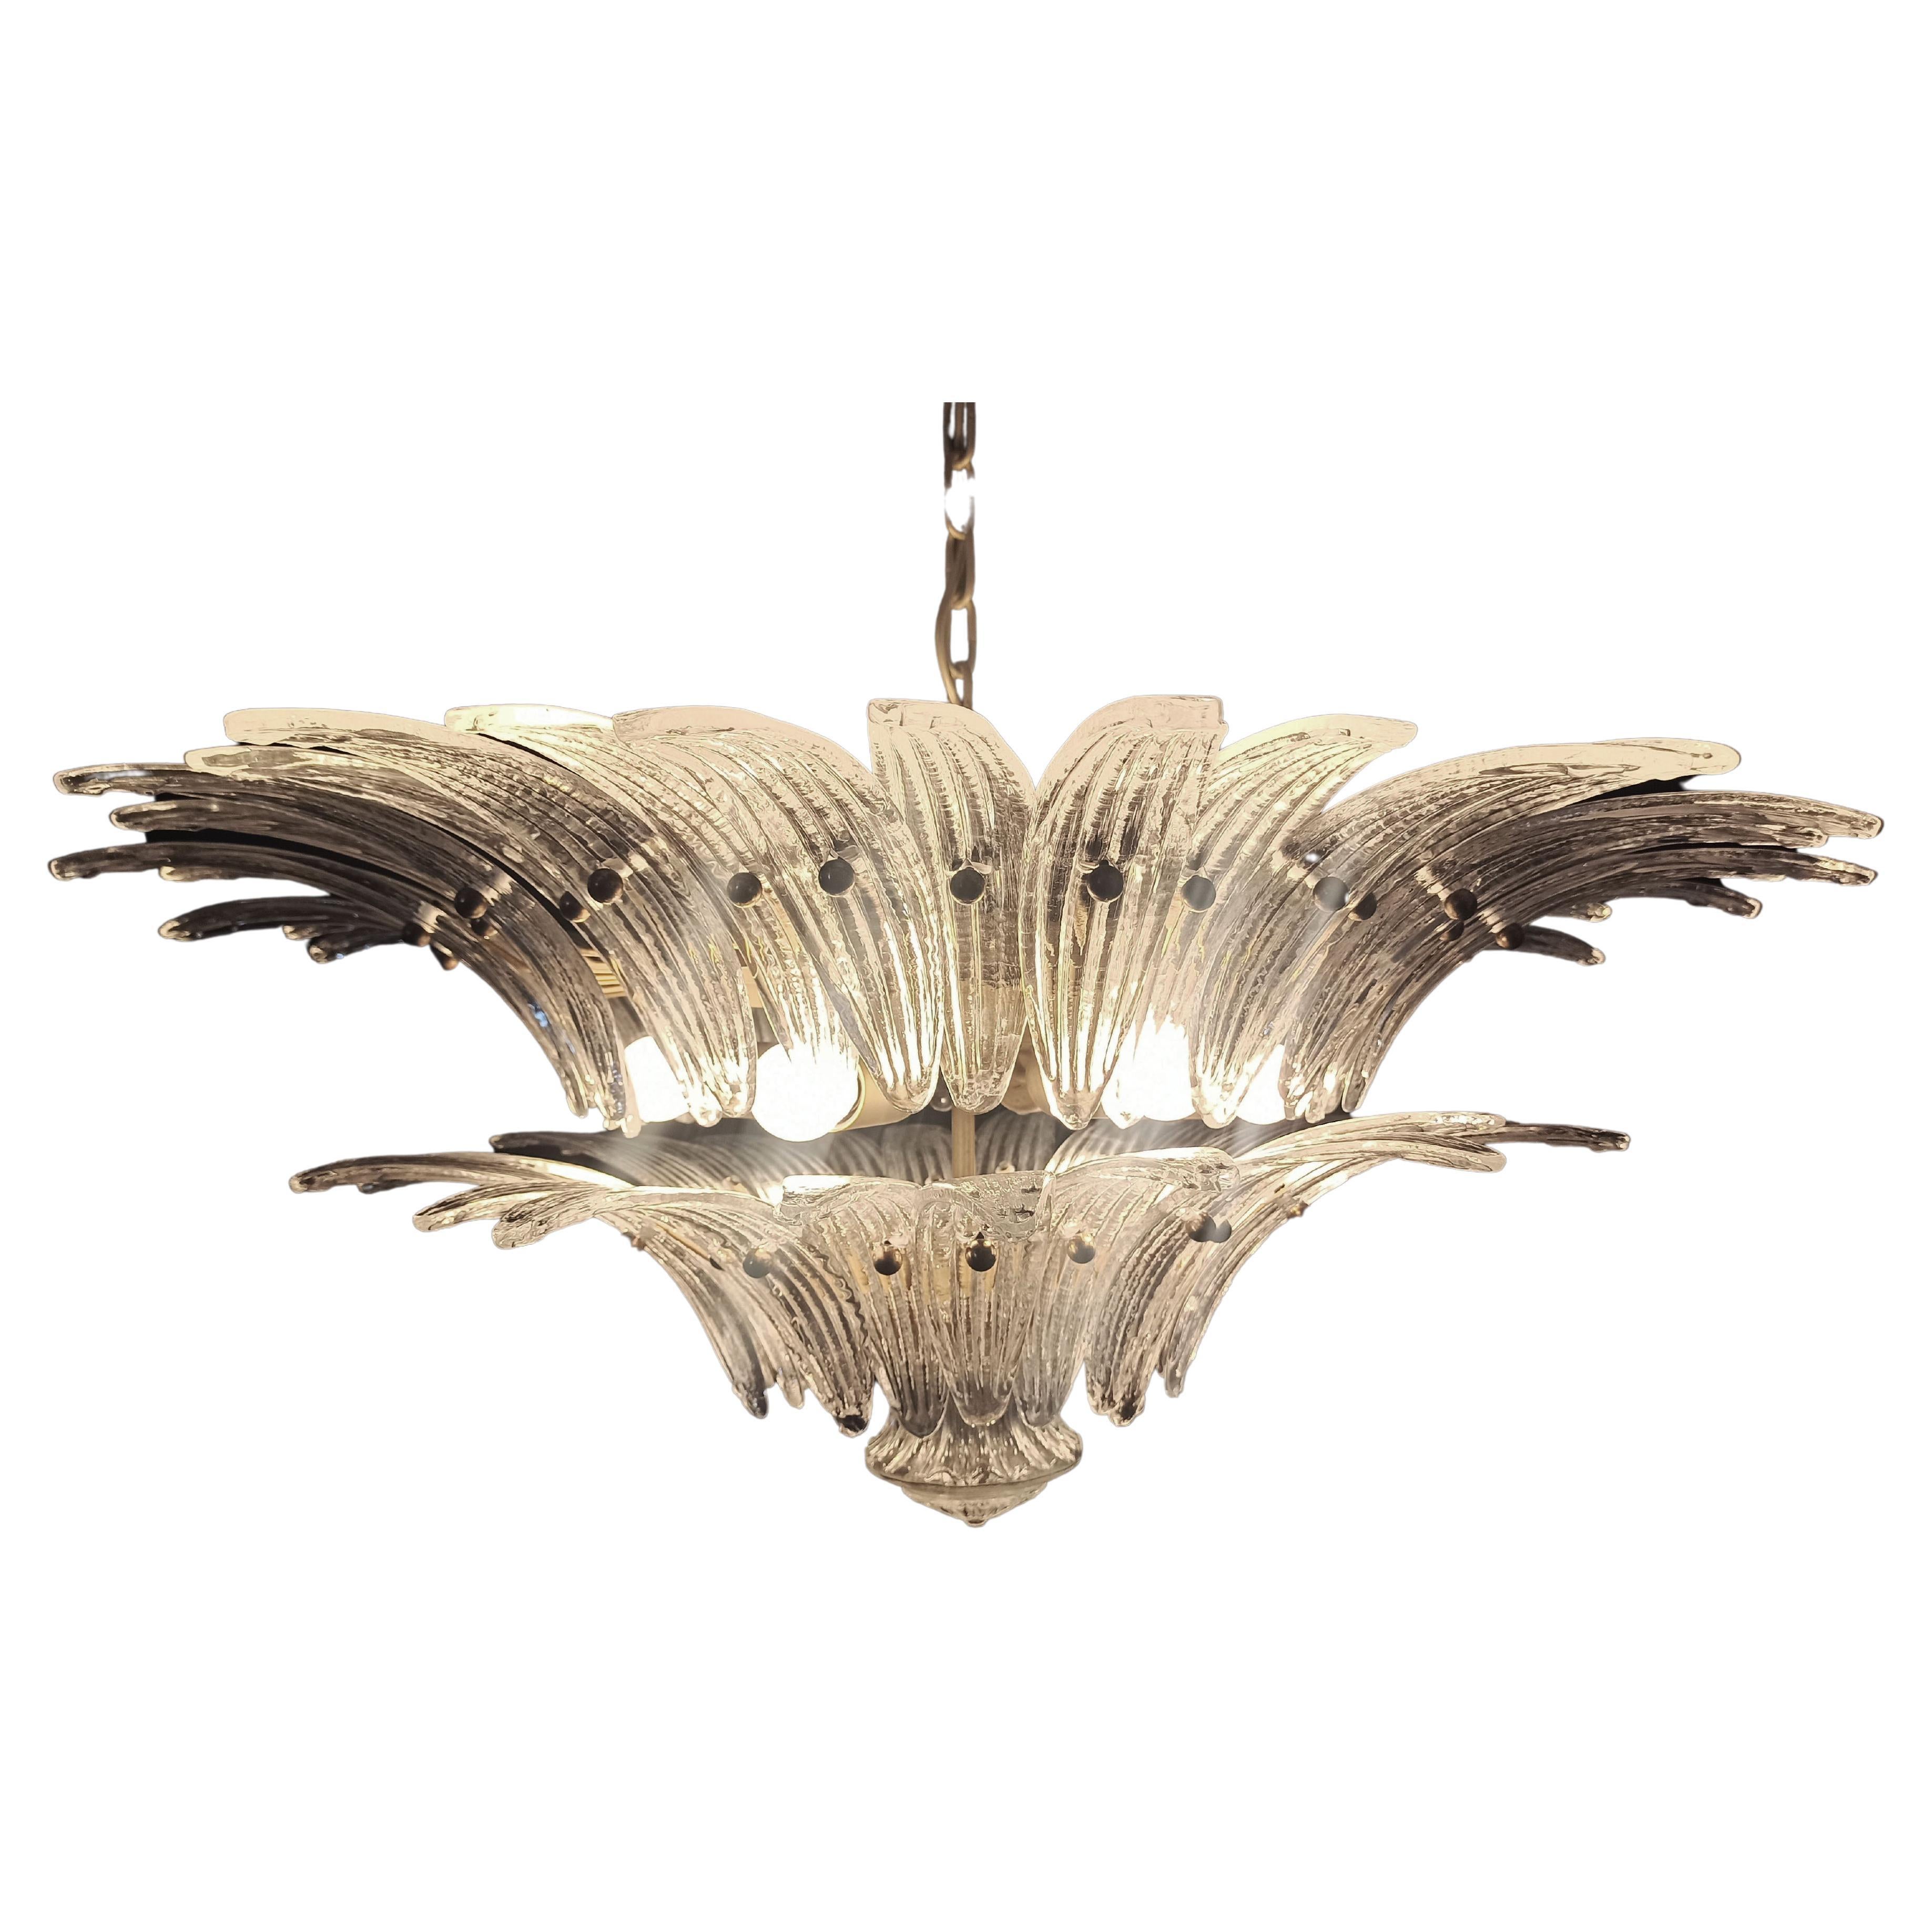 Murano glass chandelier, handmade in Murano. Each is made by 58 Murano crystal glasses in a gold metal frame. The chandelier has also a Murano glass ball in the end of the lamp. Murano blown glass in a traditional way.
Period: